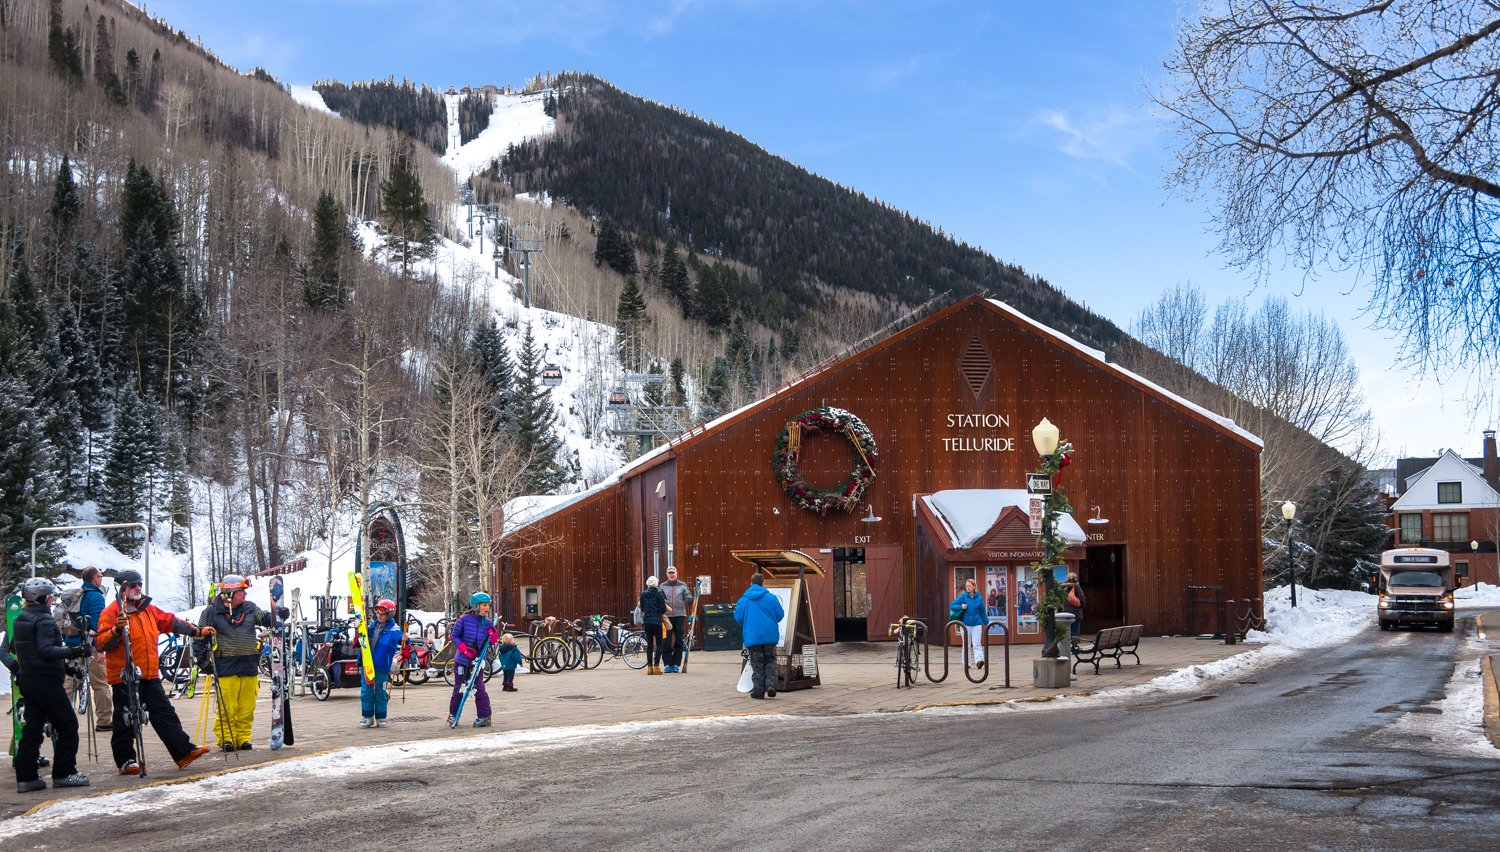 Front Picture of the Gondola Station Telluride